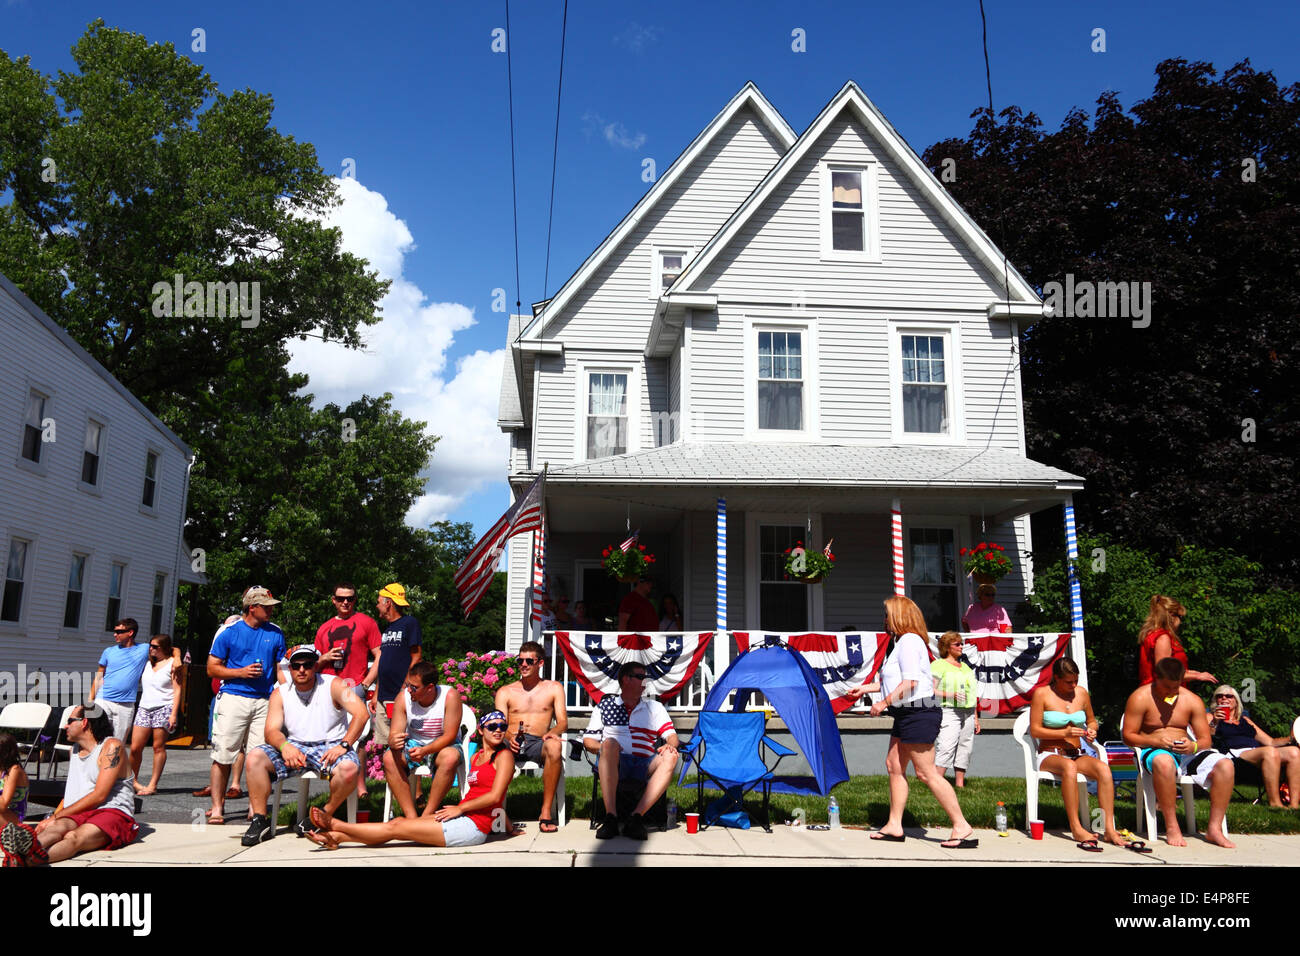 Spectators sitting outside house with decorated porch of house watching 4th of July Independence Day parades, Catonsville, Maryland, USA Stock Photo